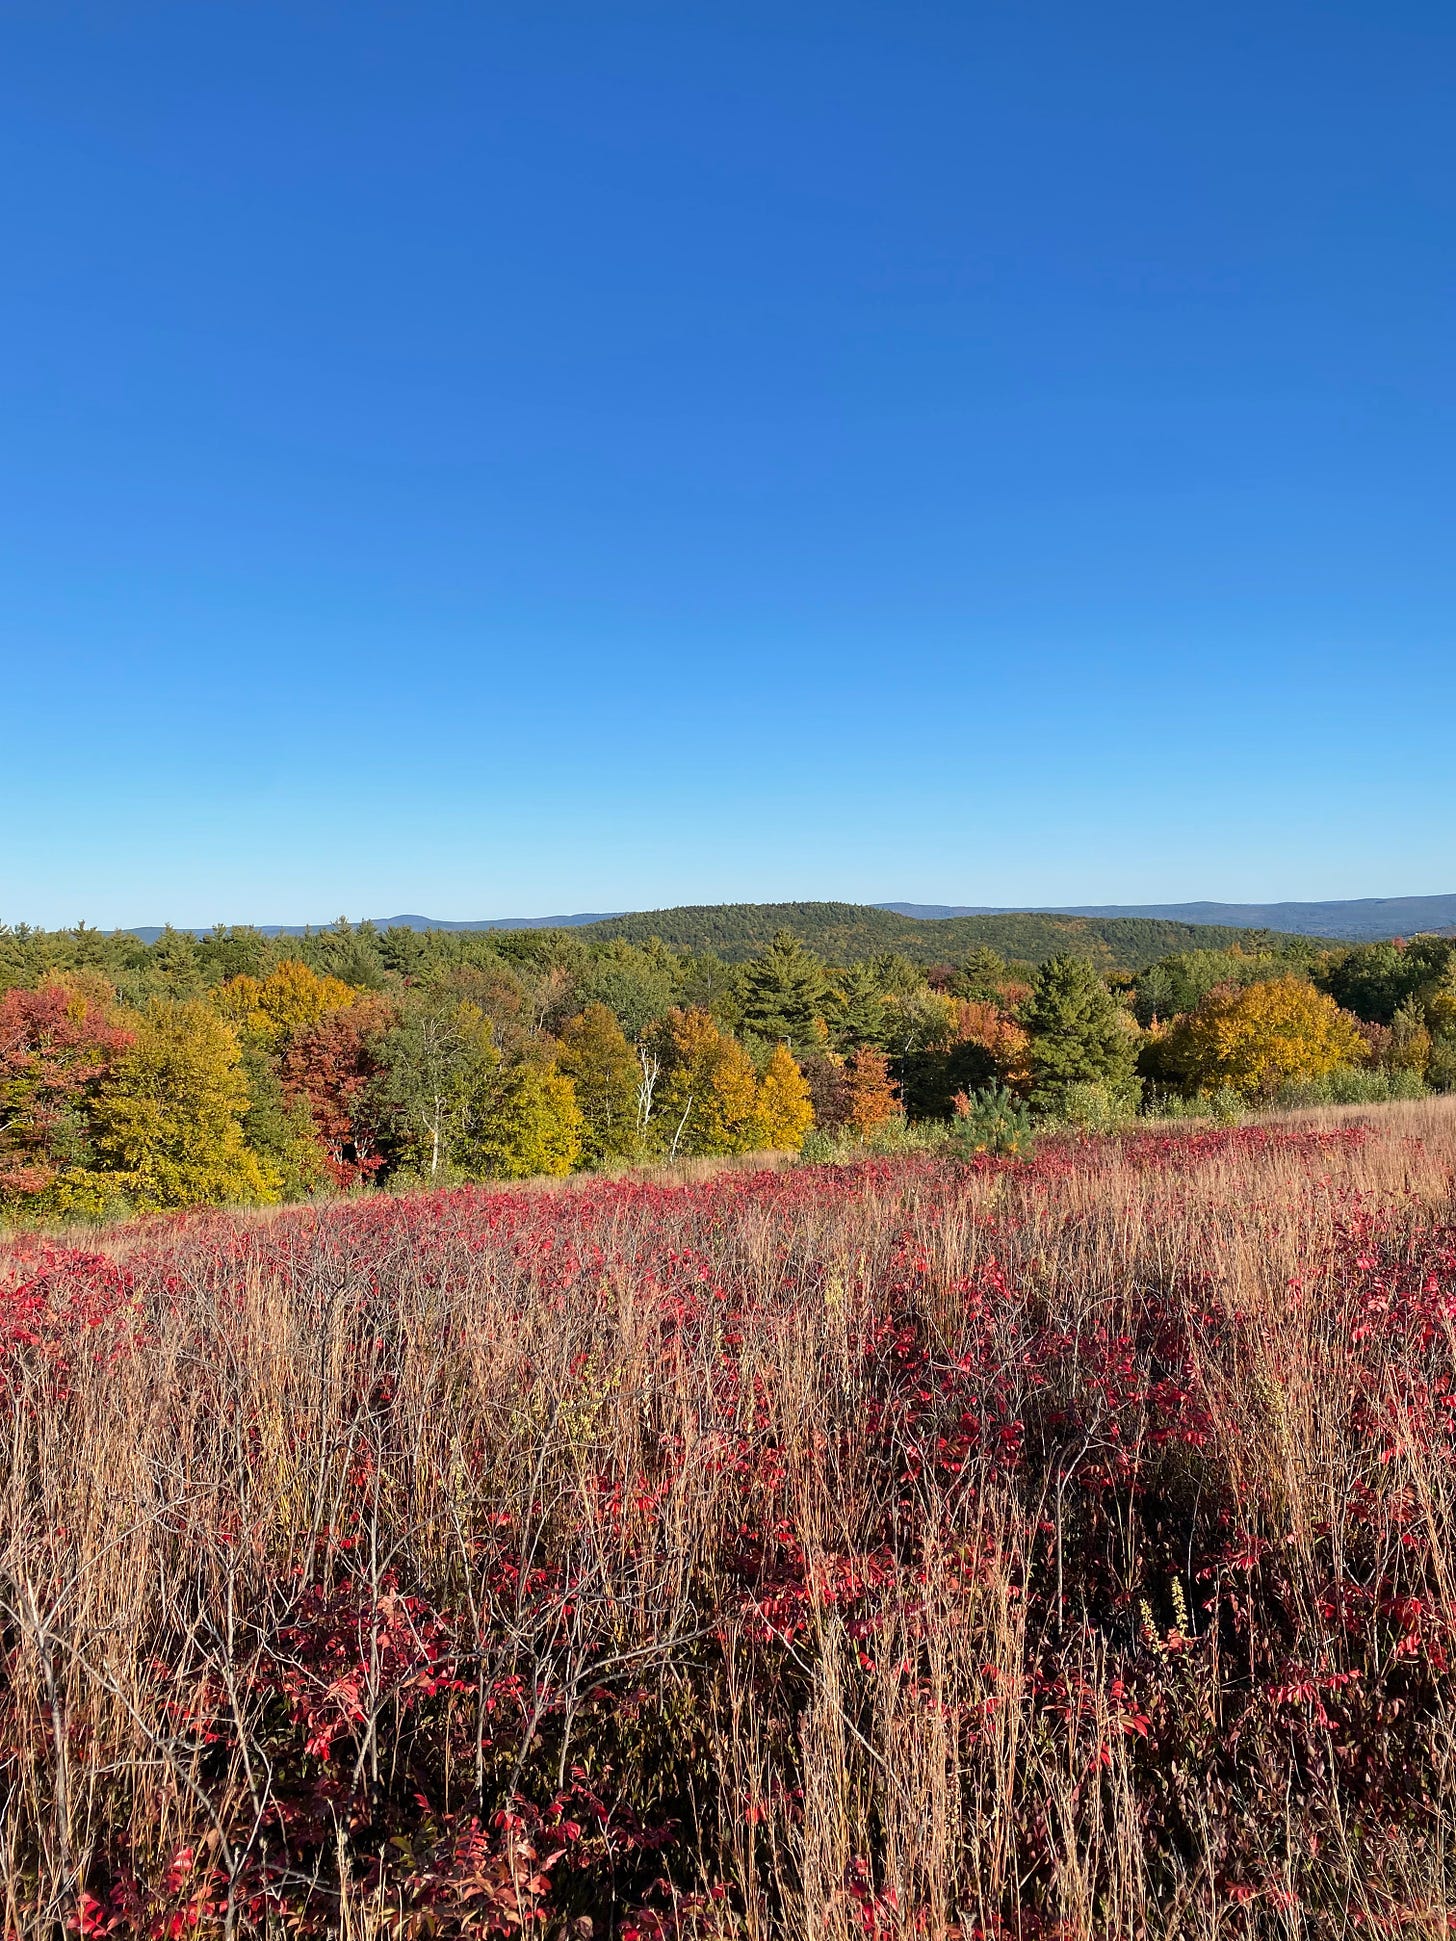 View of a meadow on a ridgetop full of red and brown grasses, hills full of red, gold, and green trees, and a bright blue sky.